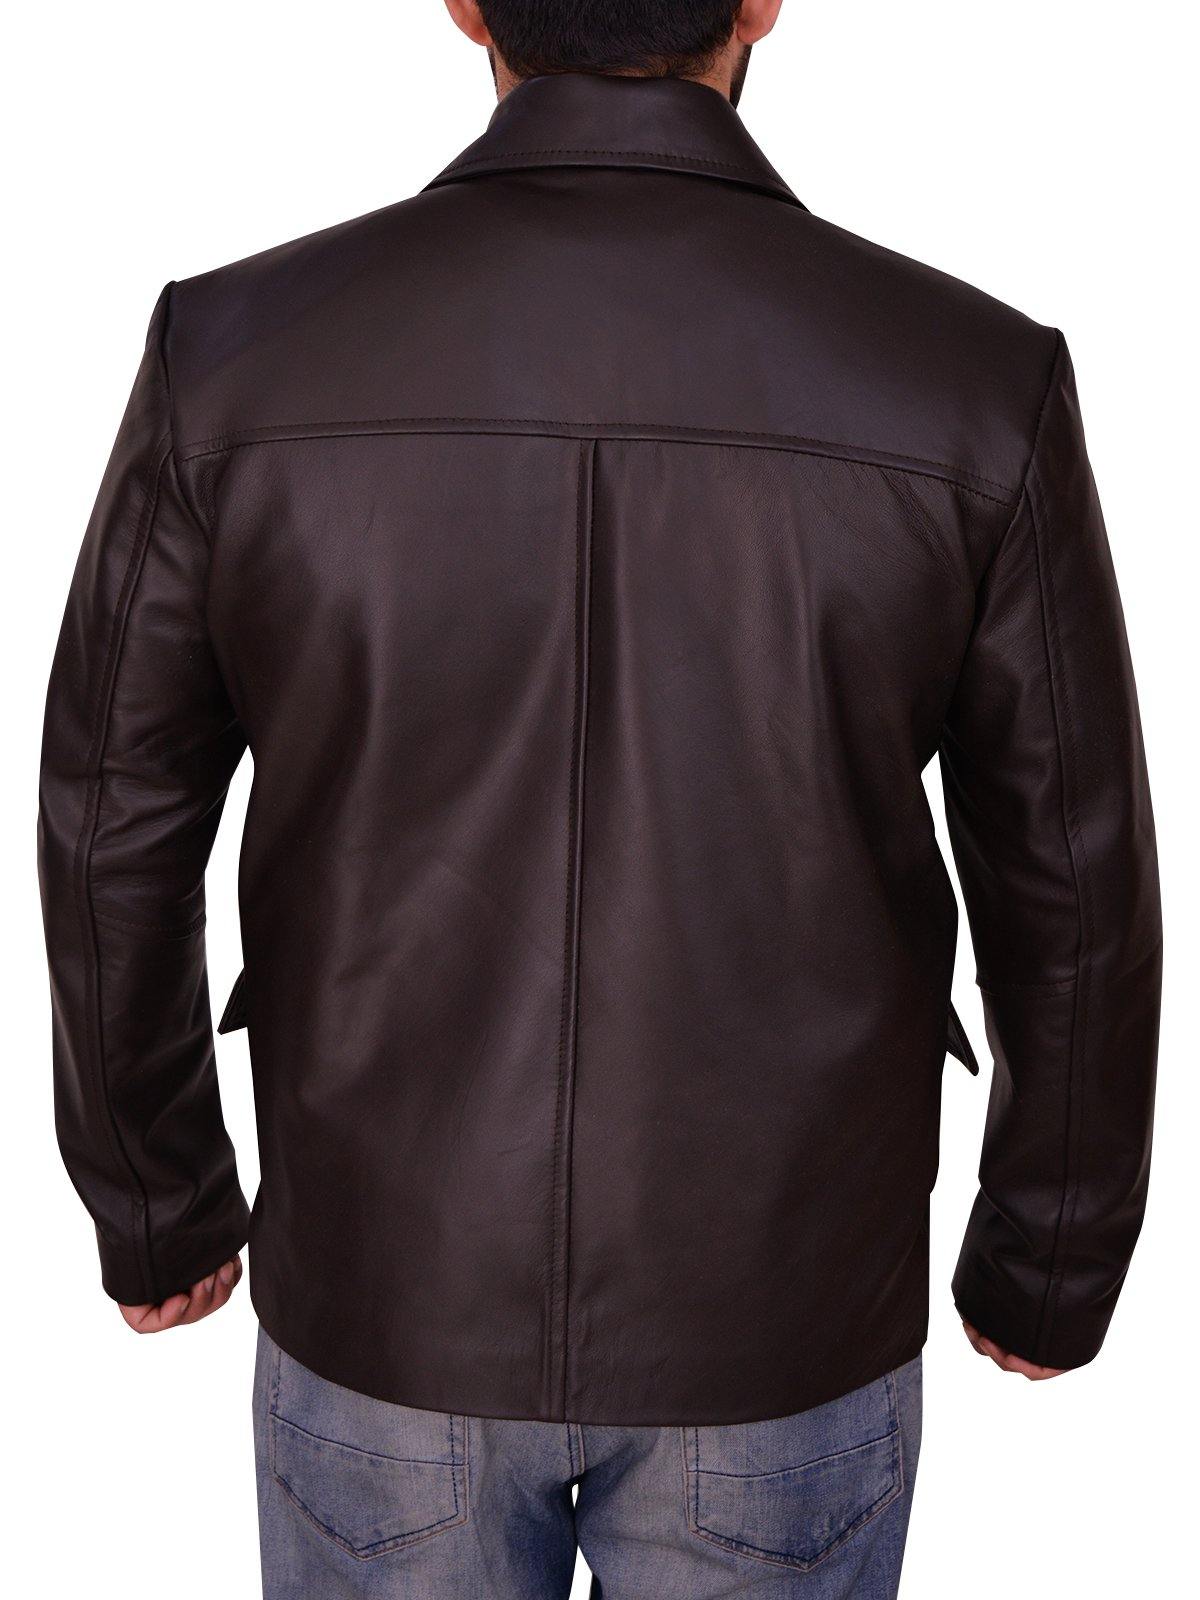 Mens Classic Brown Leather Jacket - Wiseleather